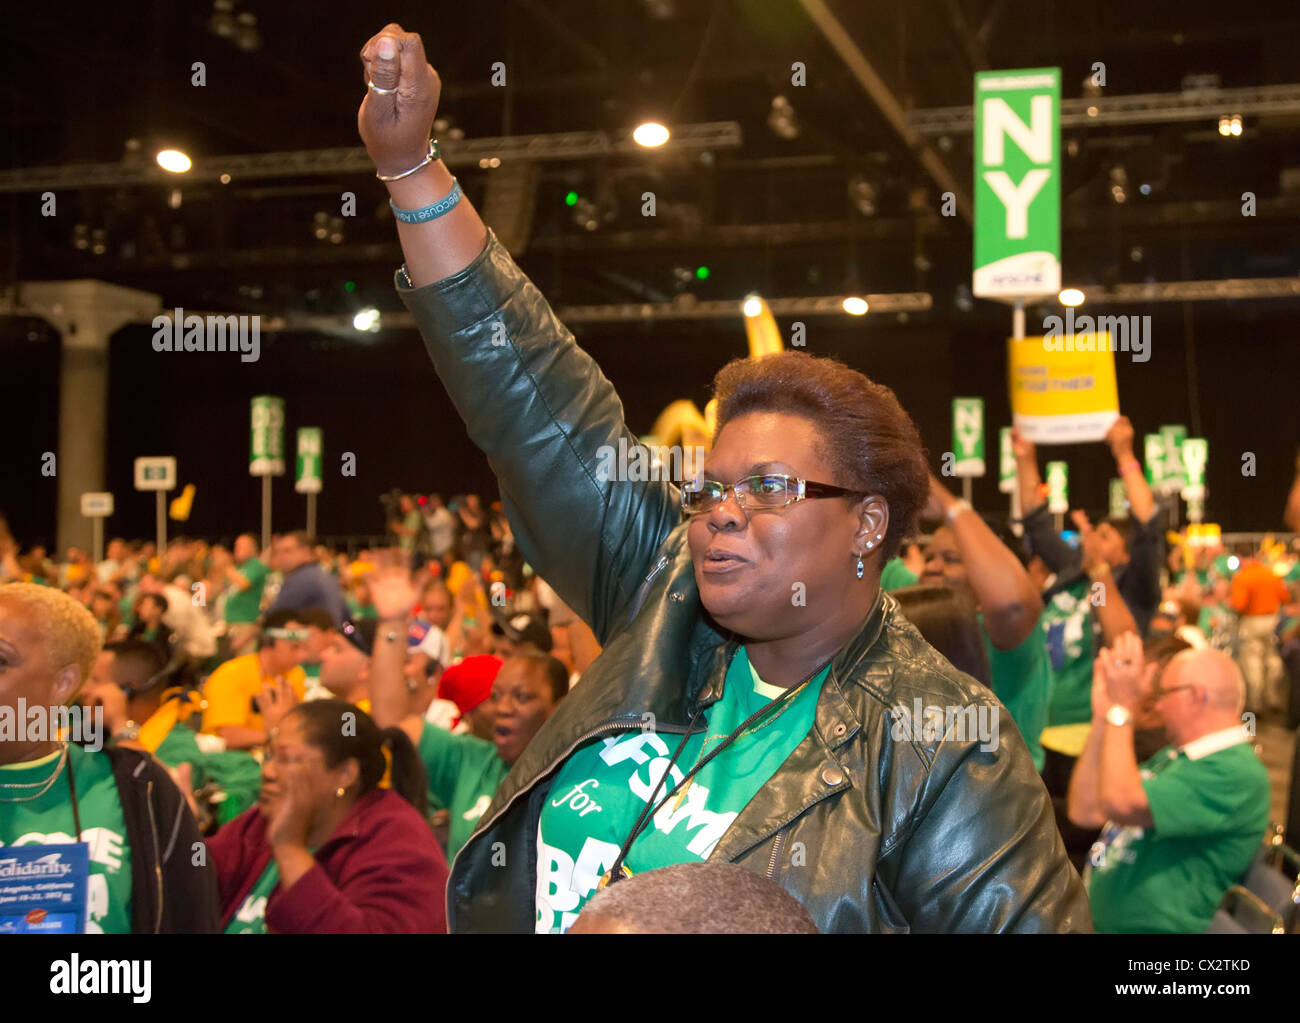 Los Angeles, California - The biannual convention of the American Federation of State, County and Municipal Employees (AFSCME). Stock Photo